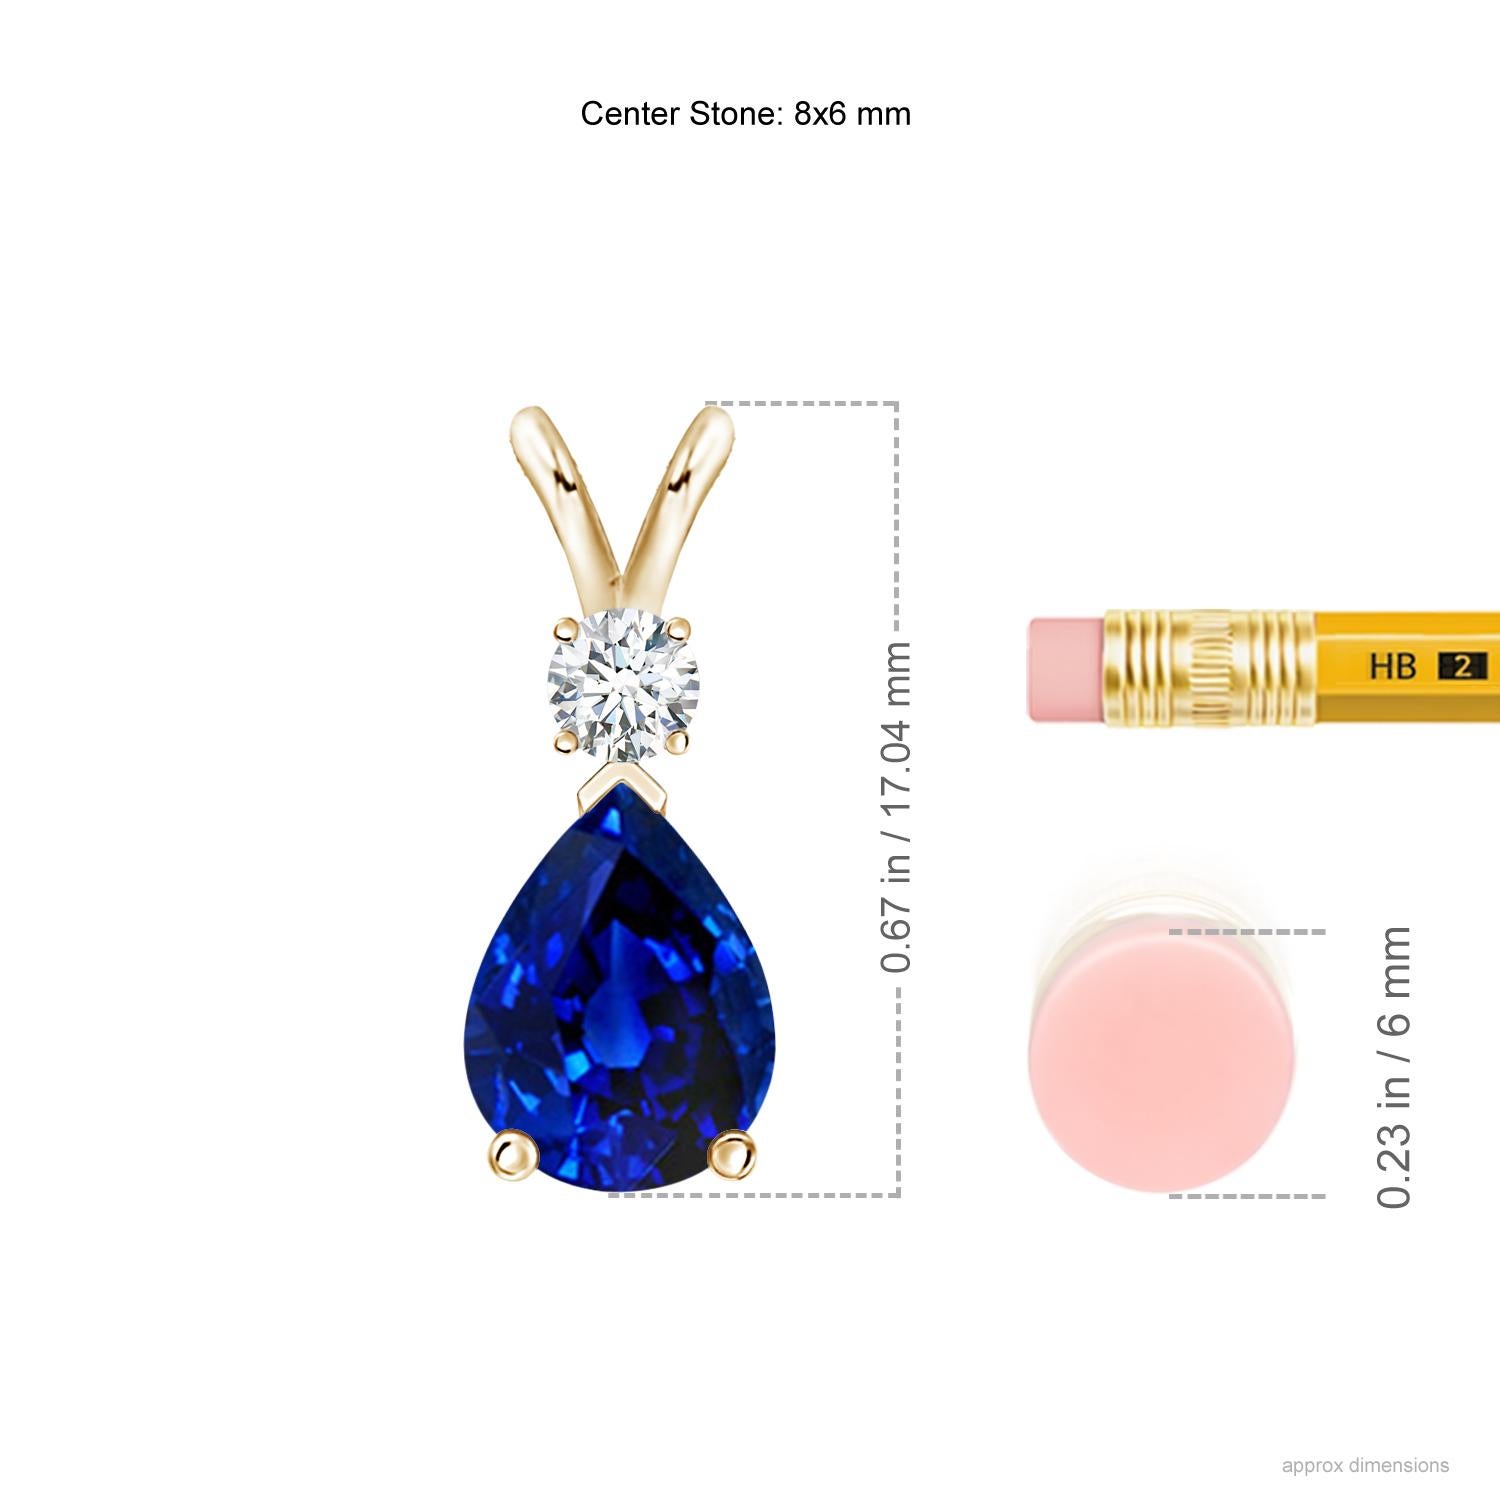 This classic solitaire pendant features a pear-shaped sapphire secured in a prong setting. A brilliant round diamond sits atop the blue gemstone adding to the design's charm. Simple yet appealing, this sapphire pendant in 14k yellow gold is crafted